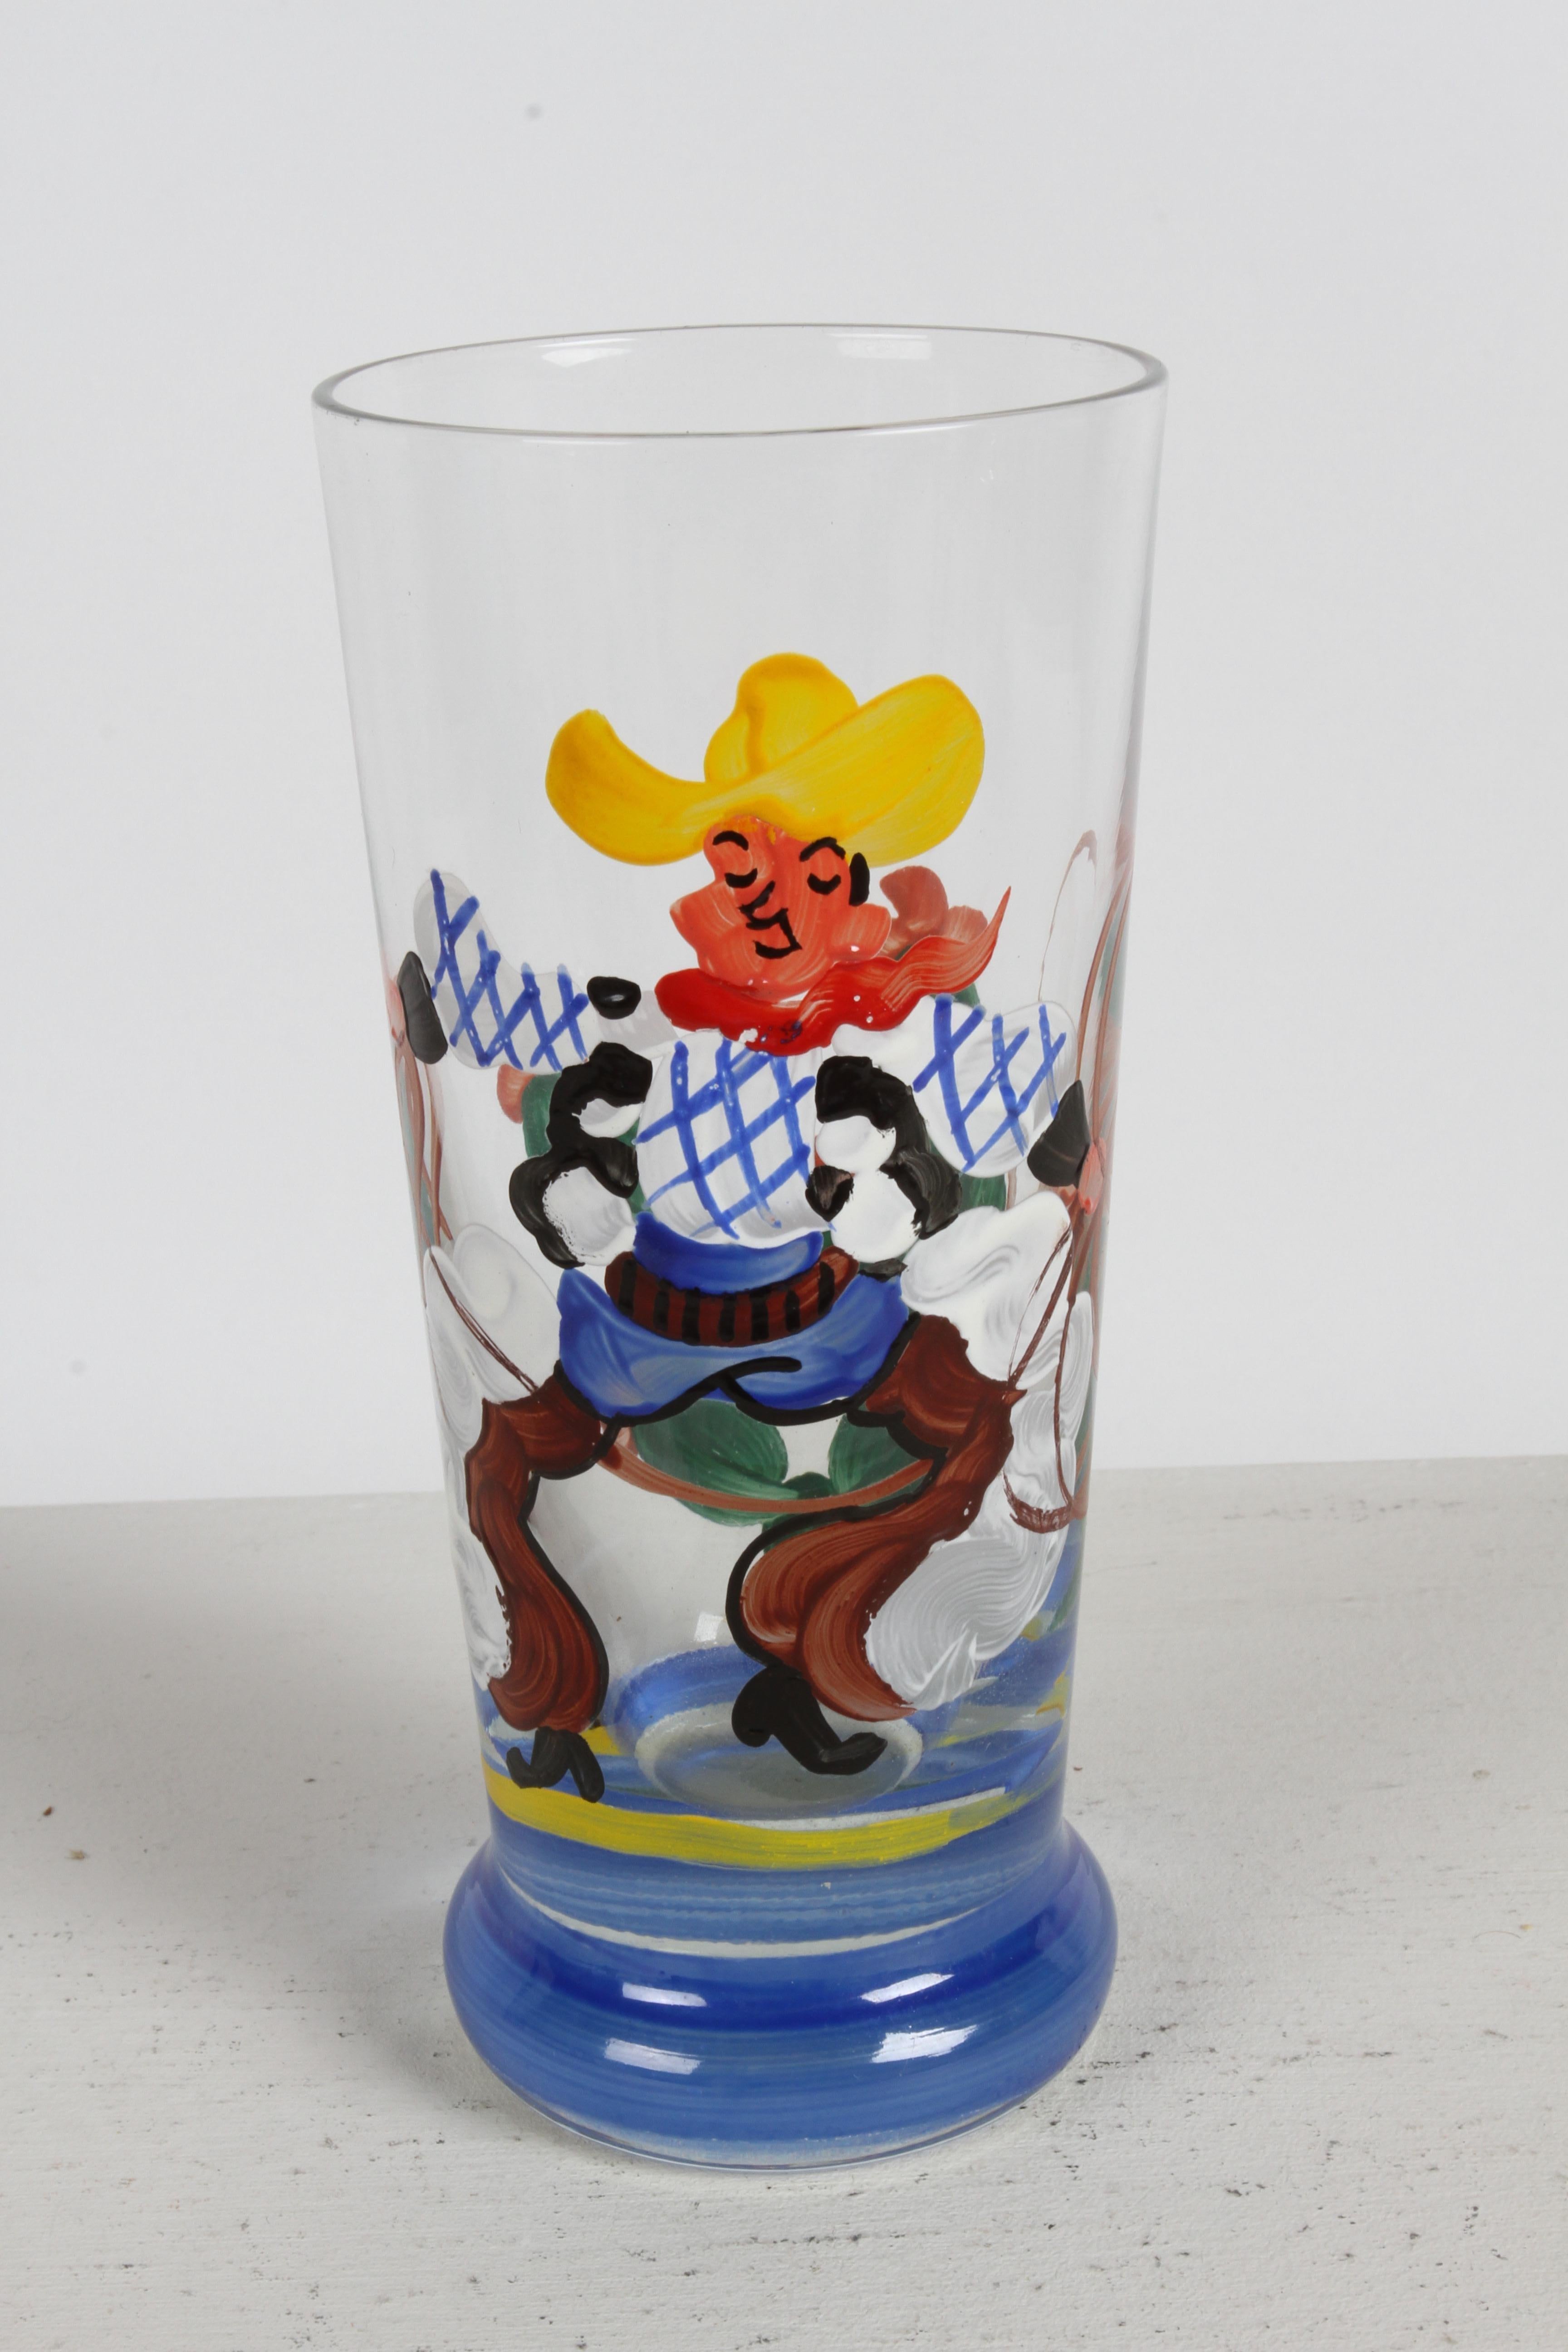 1940s Artist Hand-Painted Bar Glasses with Cowboy, Lasso & Cactus Theme - Rita  For Sale 11